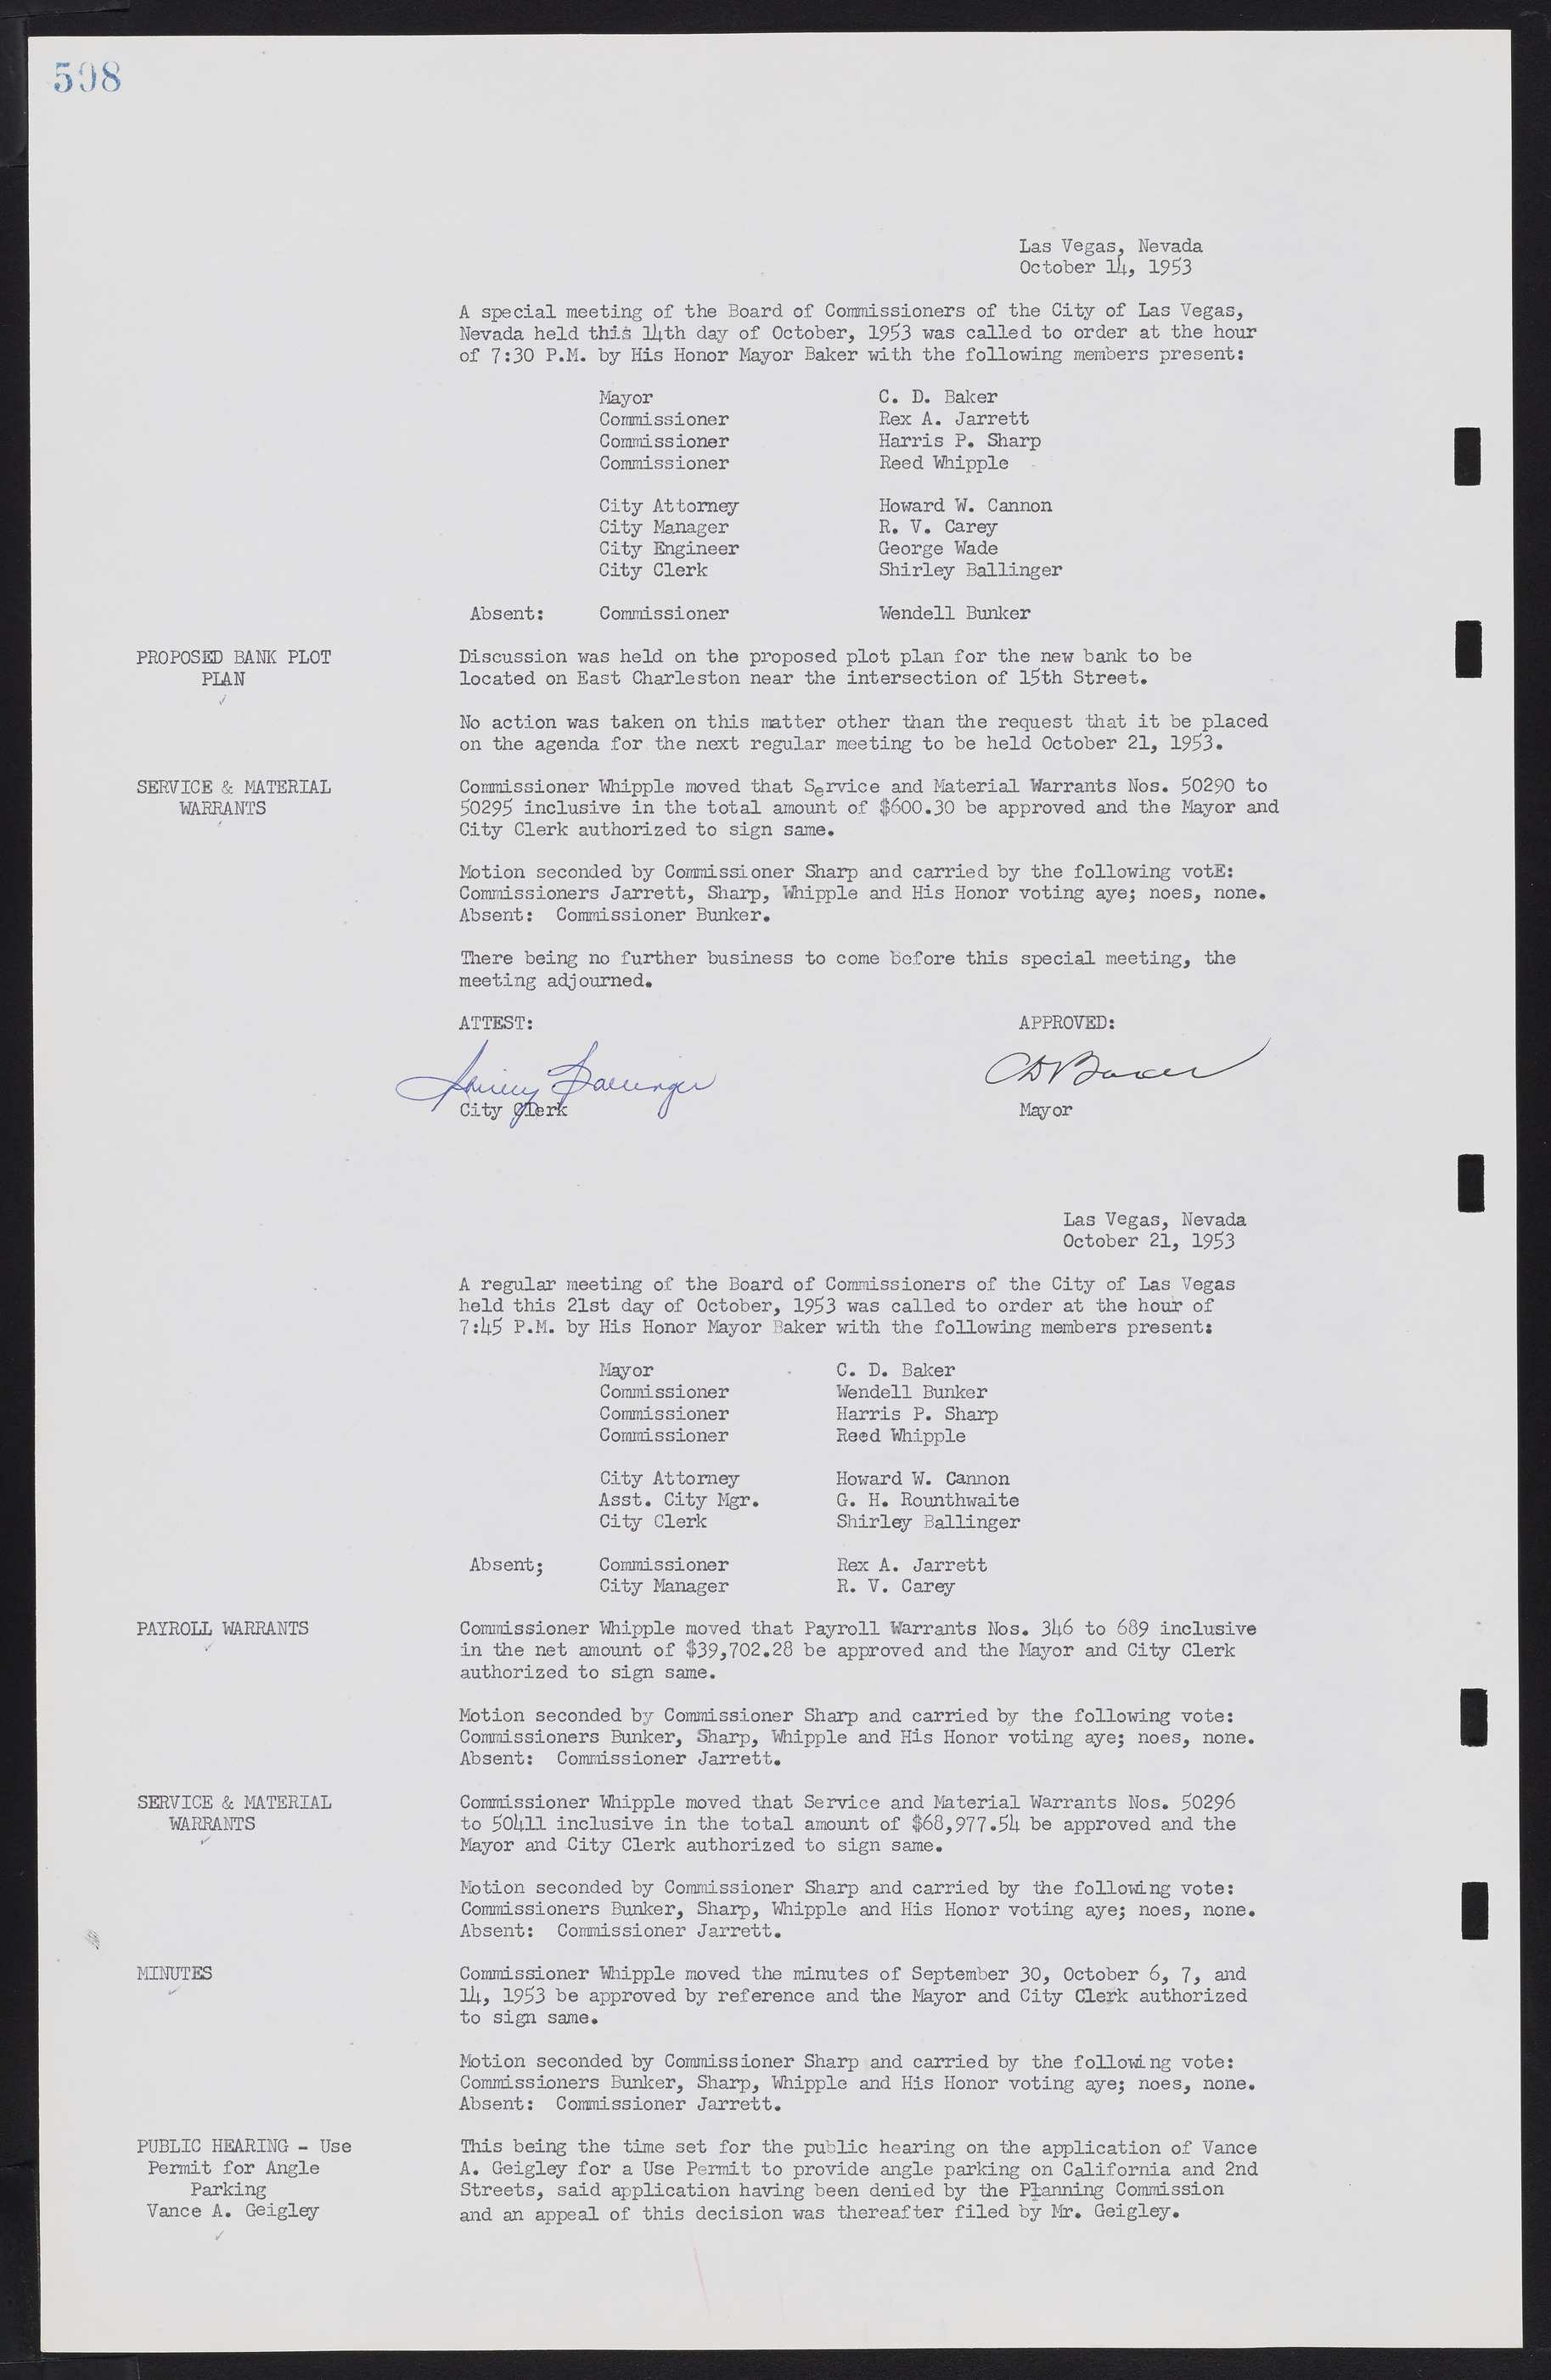 Las Vegas City Commission Minutes, May 26, 1952 to February 17, 1954, lvc000008-538